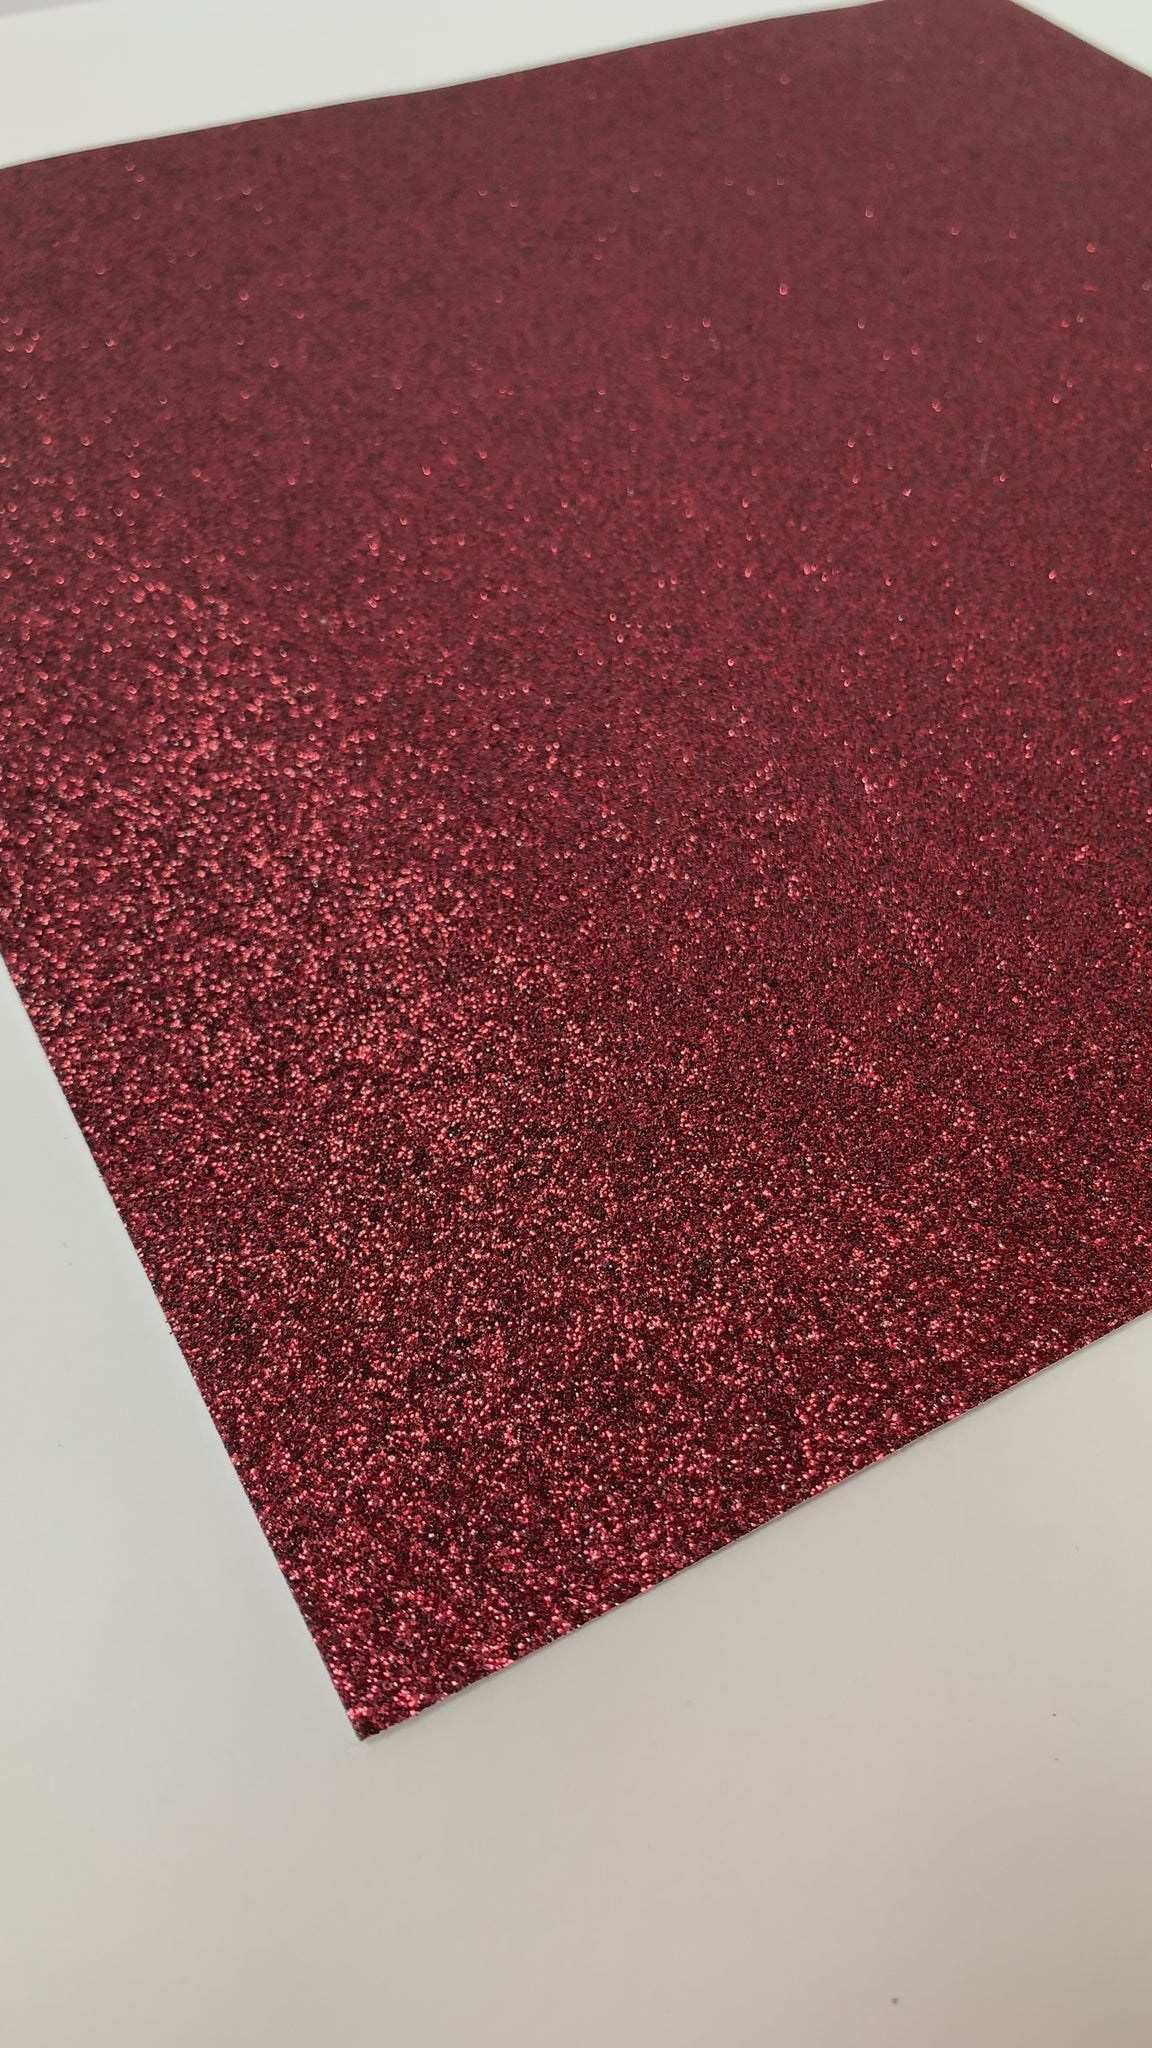 25 Sheets Red Glitter Cardstock - 110lb. 300 GSM - 8.2 x 11.7 Inch  Heavyweigh